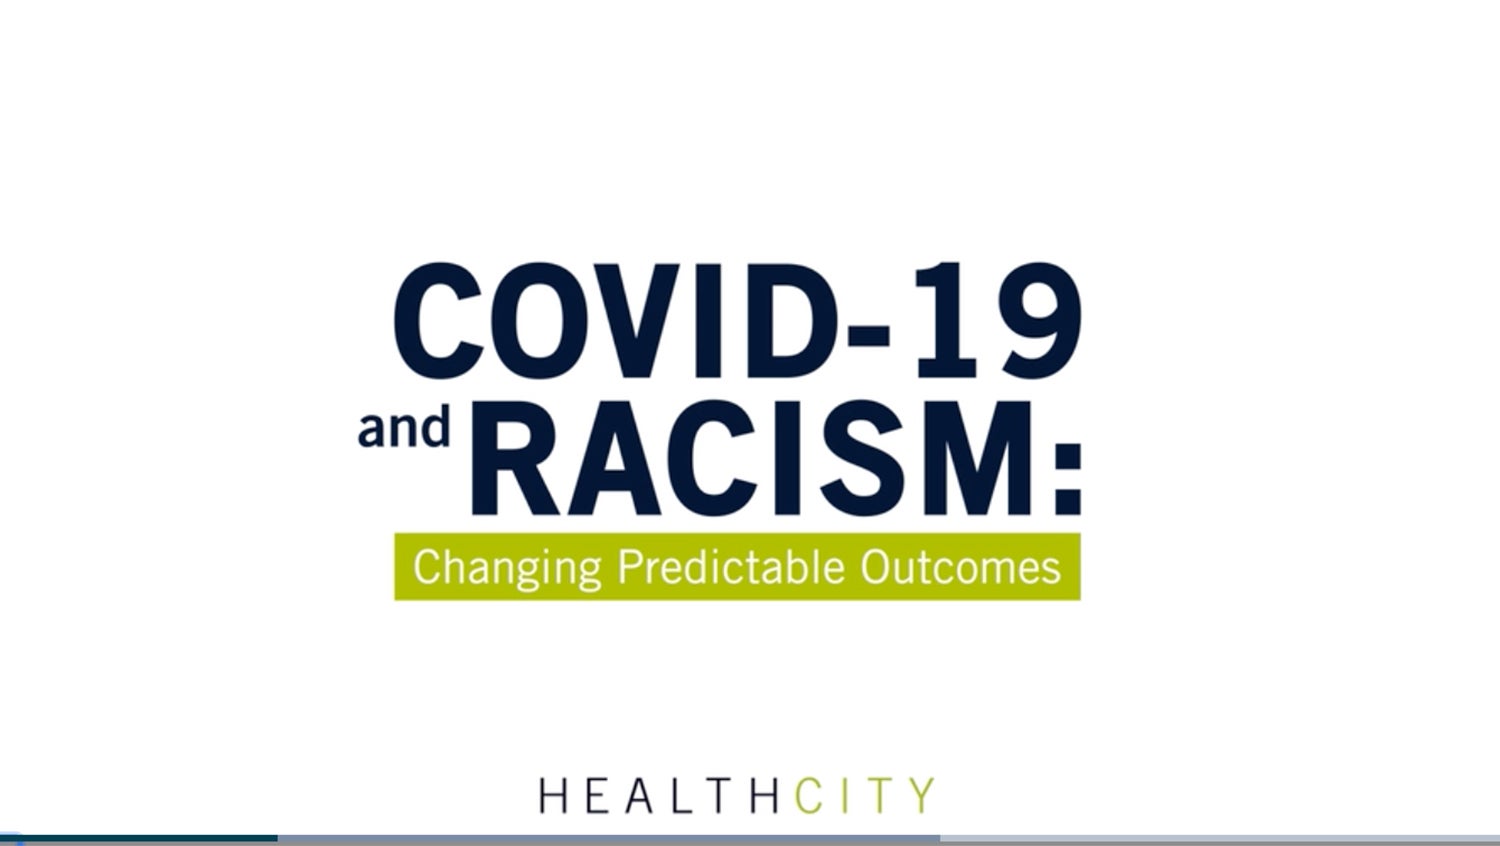 Covid-19 and Racism